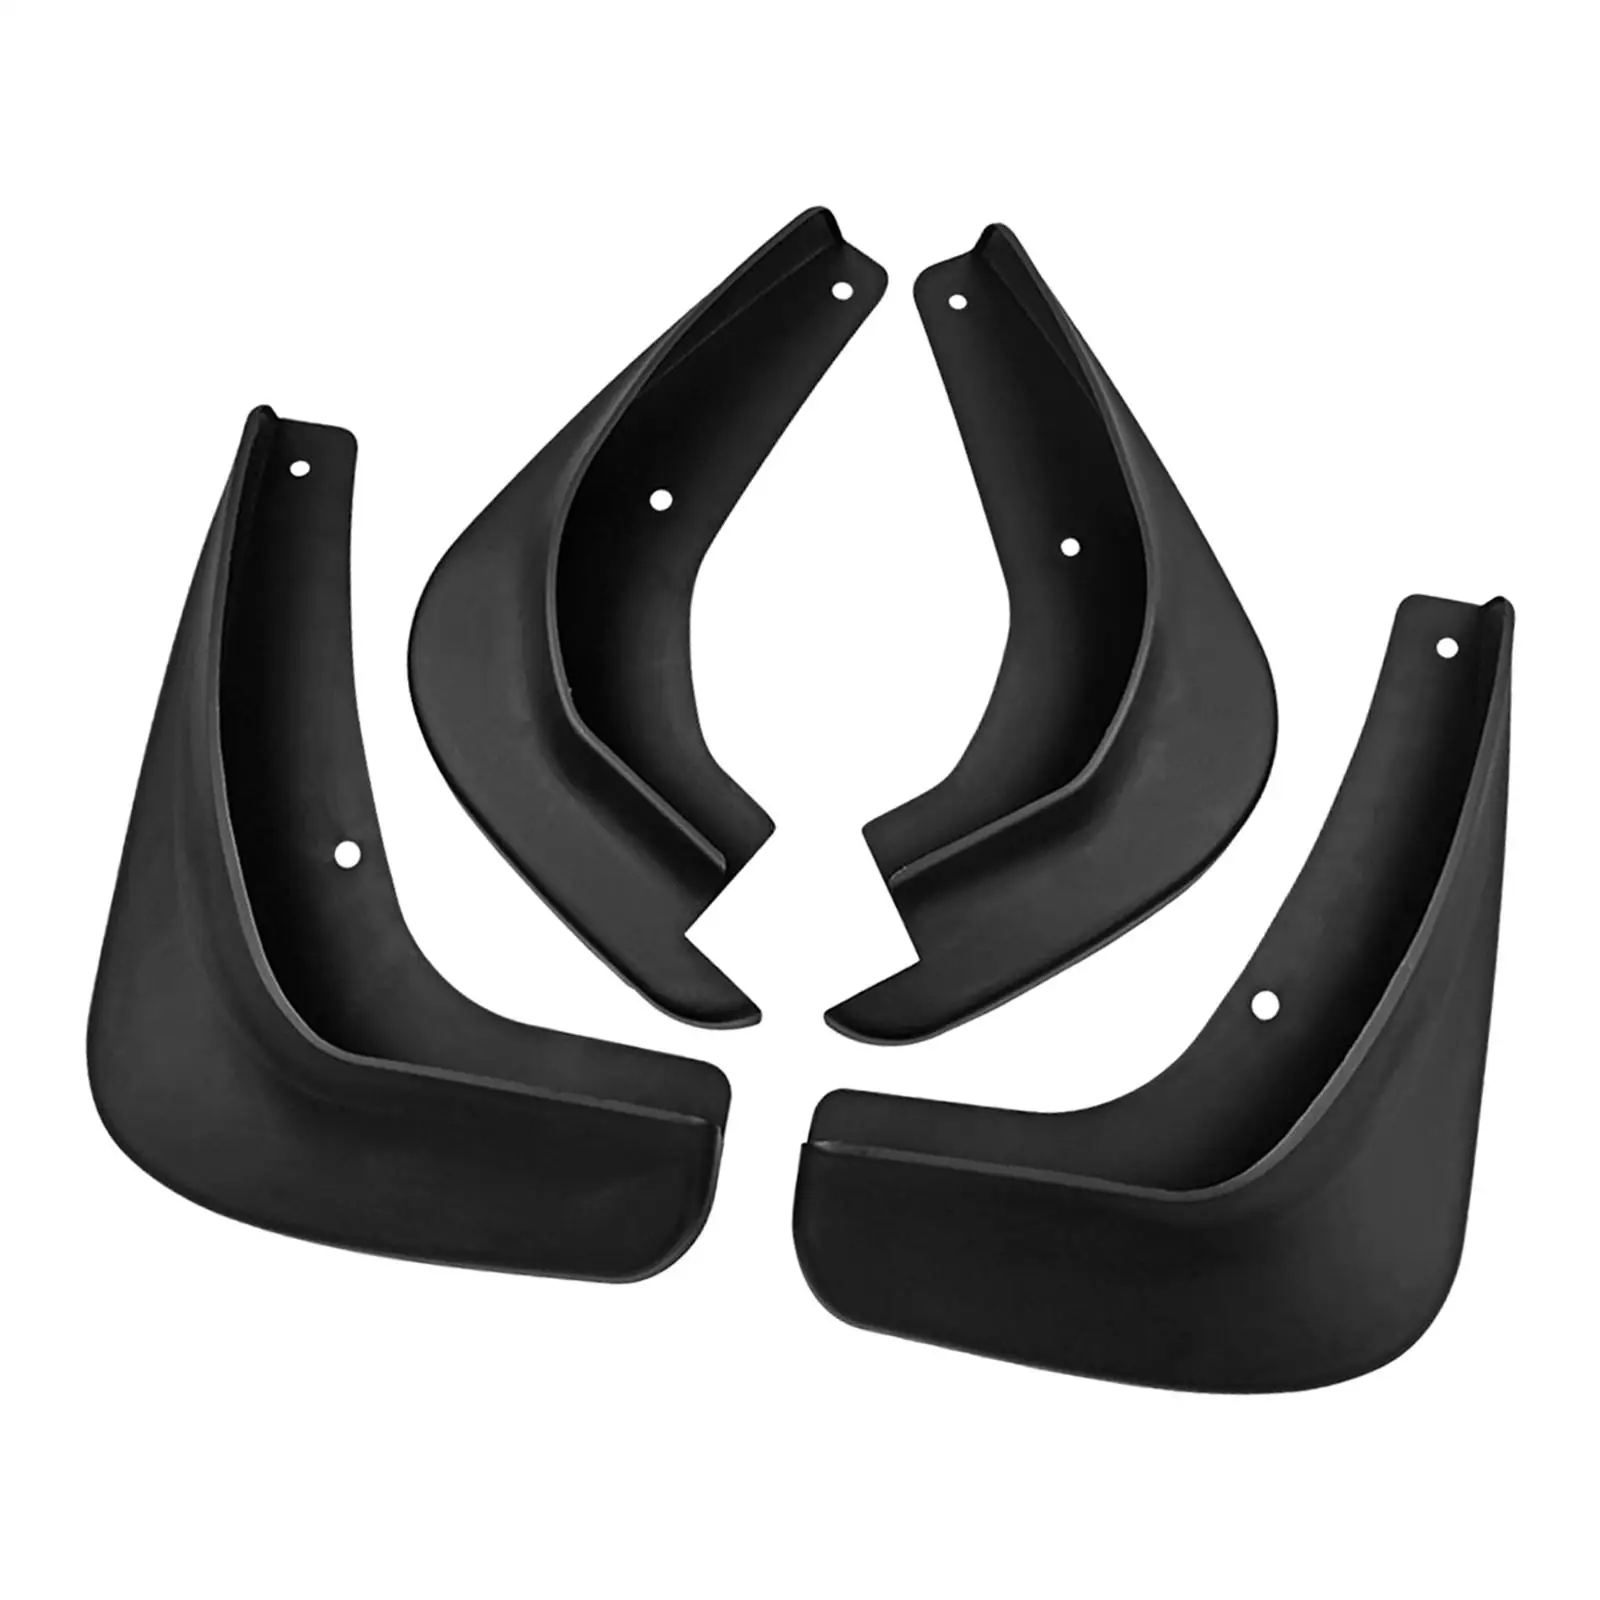 4x Mud Flaps Front Rear Replacement Parts Splash Guards Mudguard for Ford Mondeo